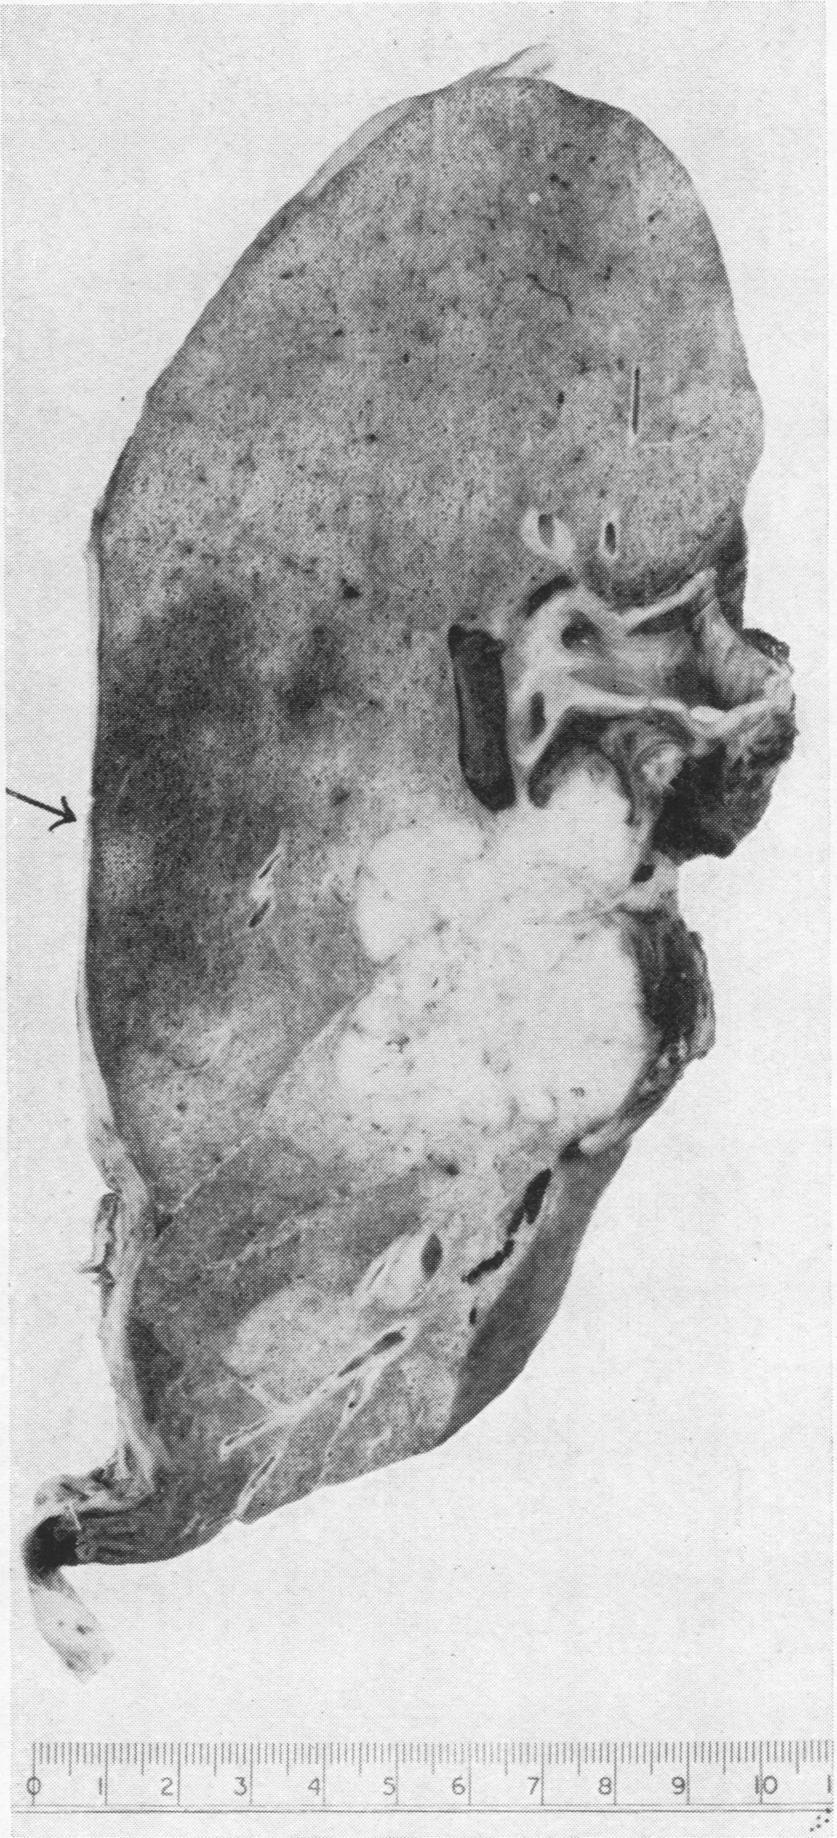 FIG. 12.-Case 5: cut surface of right lung showing carcinoma of middle lobe bronchus and peripheral infarct (arrowed) in anterior segment of upper lobe.